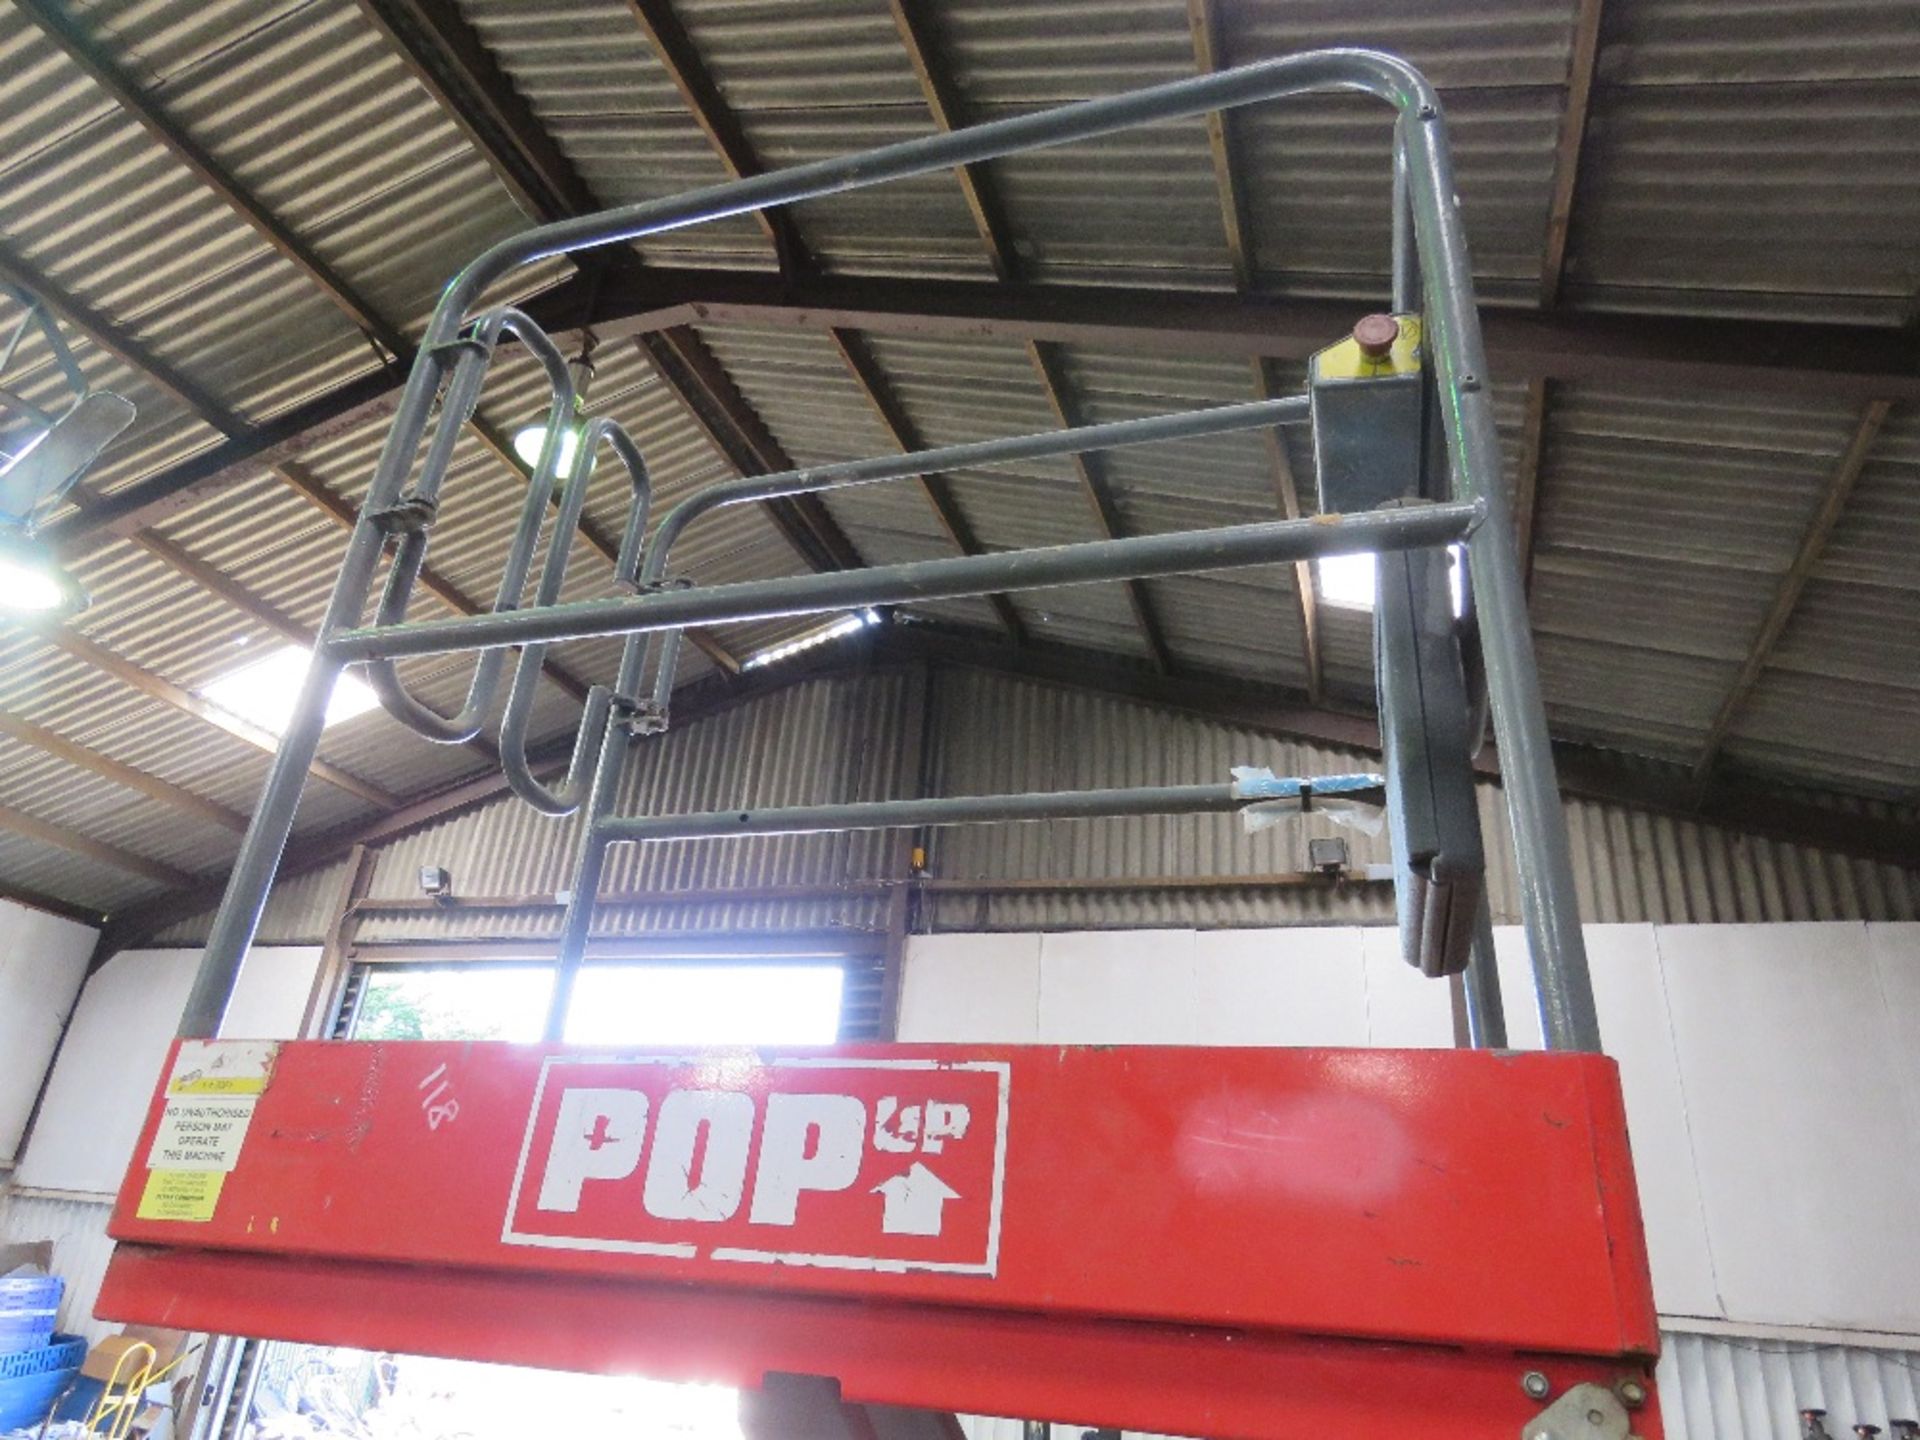 POPUP PUSH 6 PRO SCISSOR ACCESS LIFT. WHNE TESTED WAS SEEN TO LIFT AND LOWER.